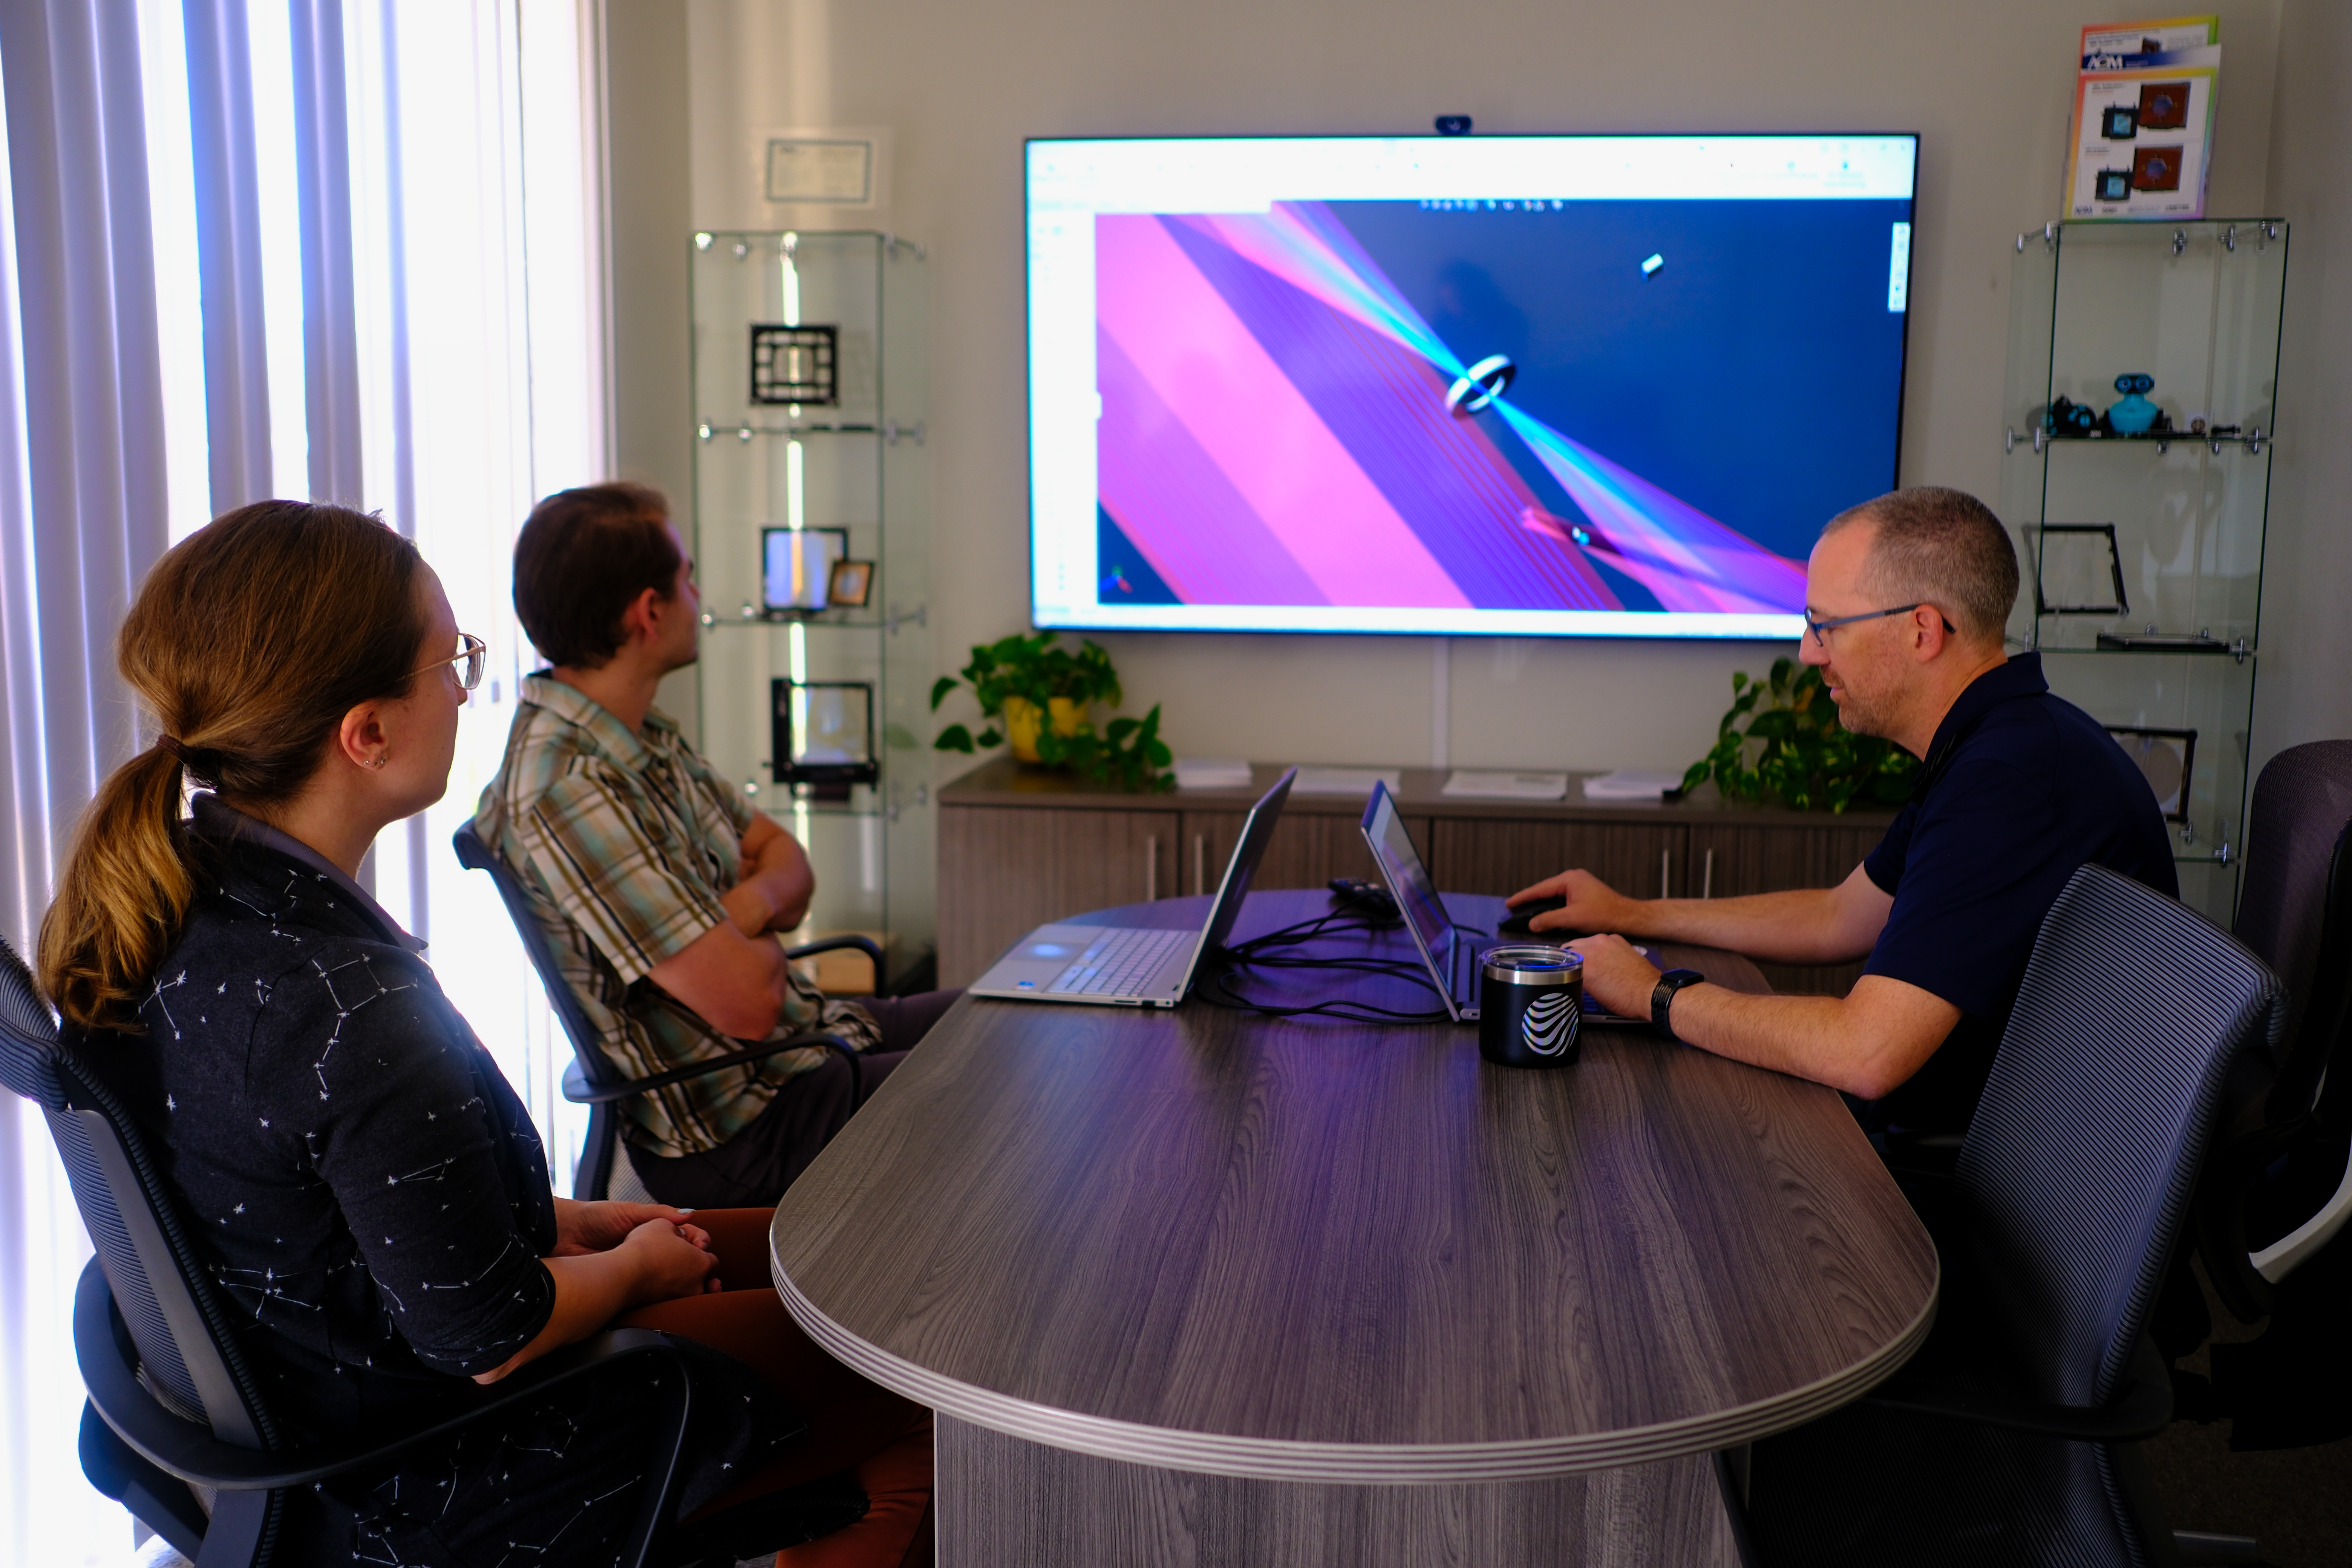 Three engineers sitting at a conference table analyze a ray diagram of an optical system on a large TV screen